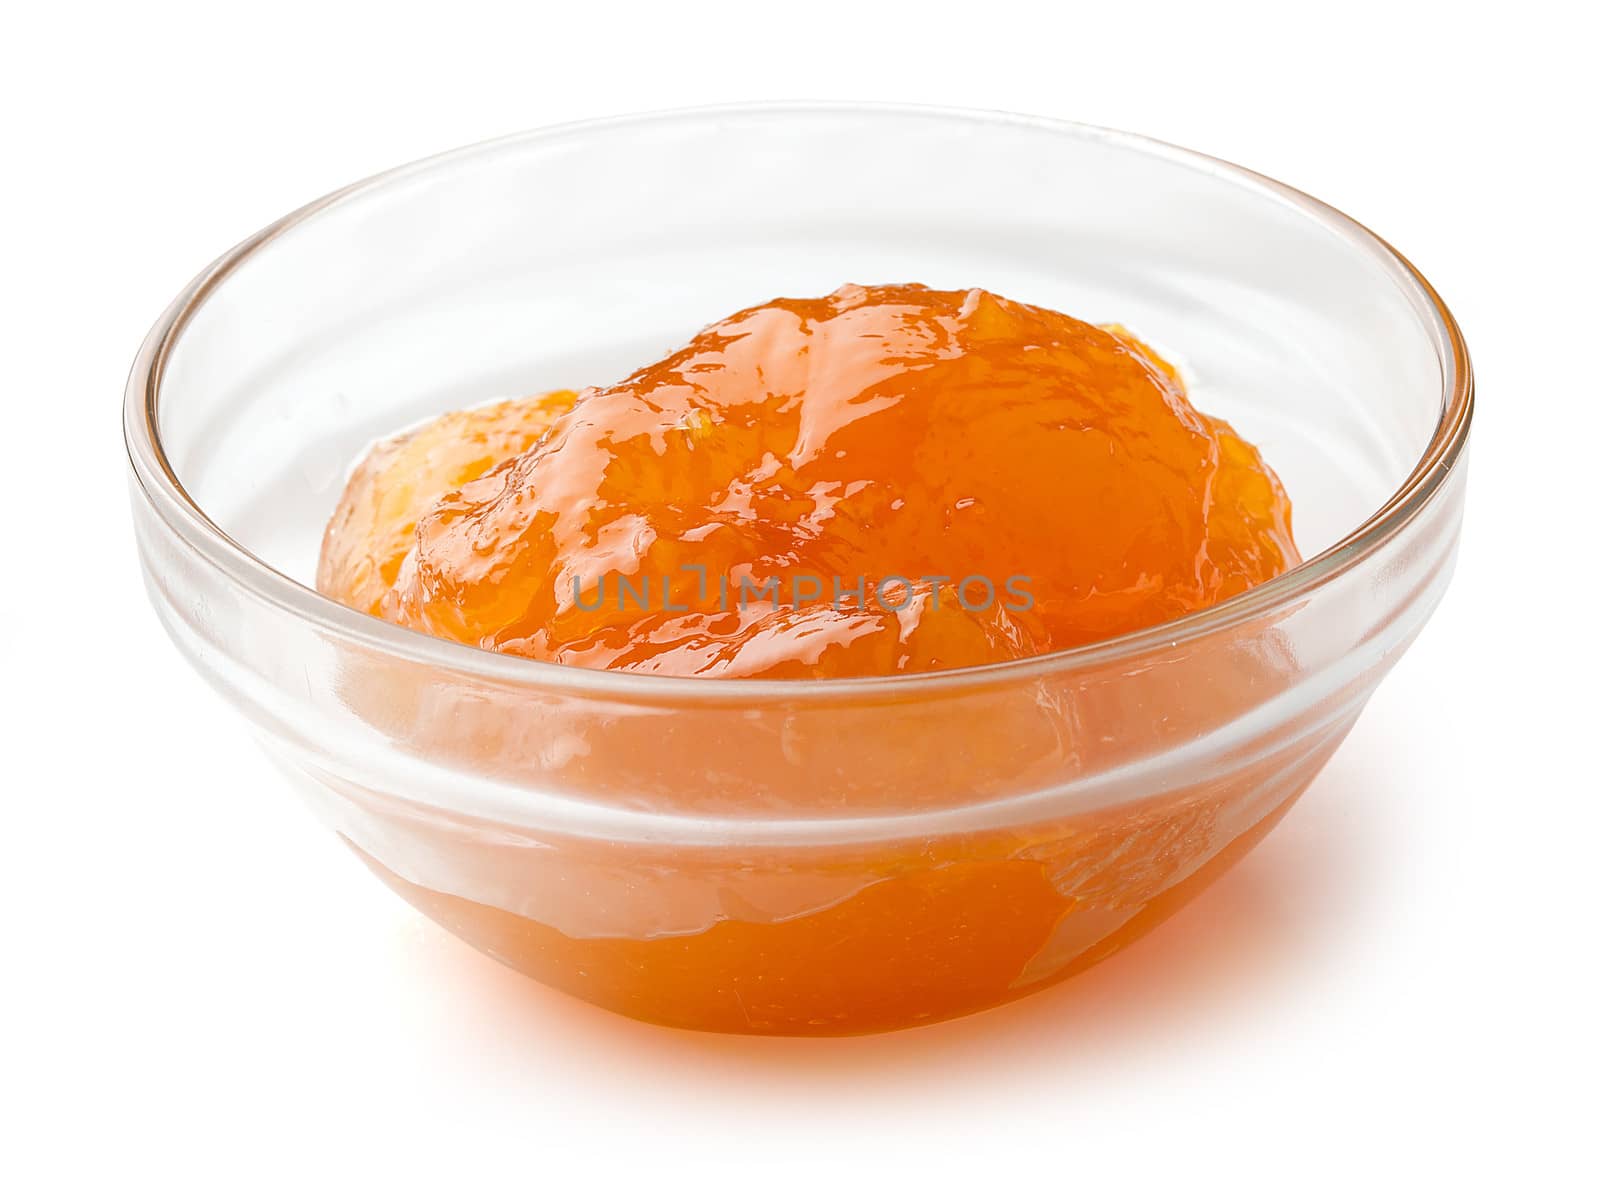 Apricot's jam in the glass bowl on the white